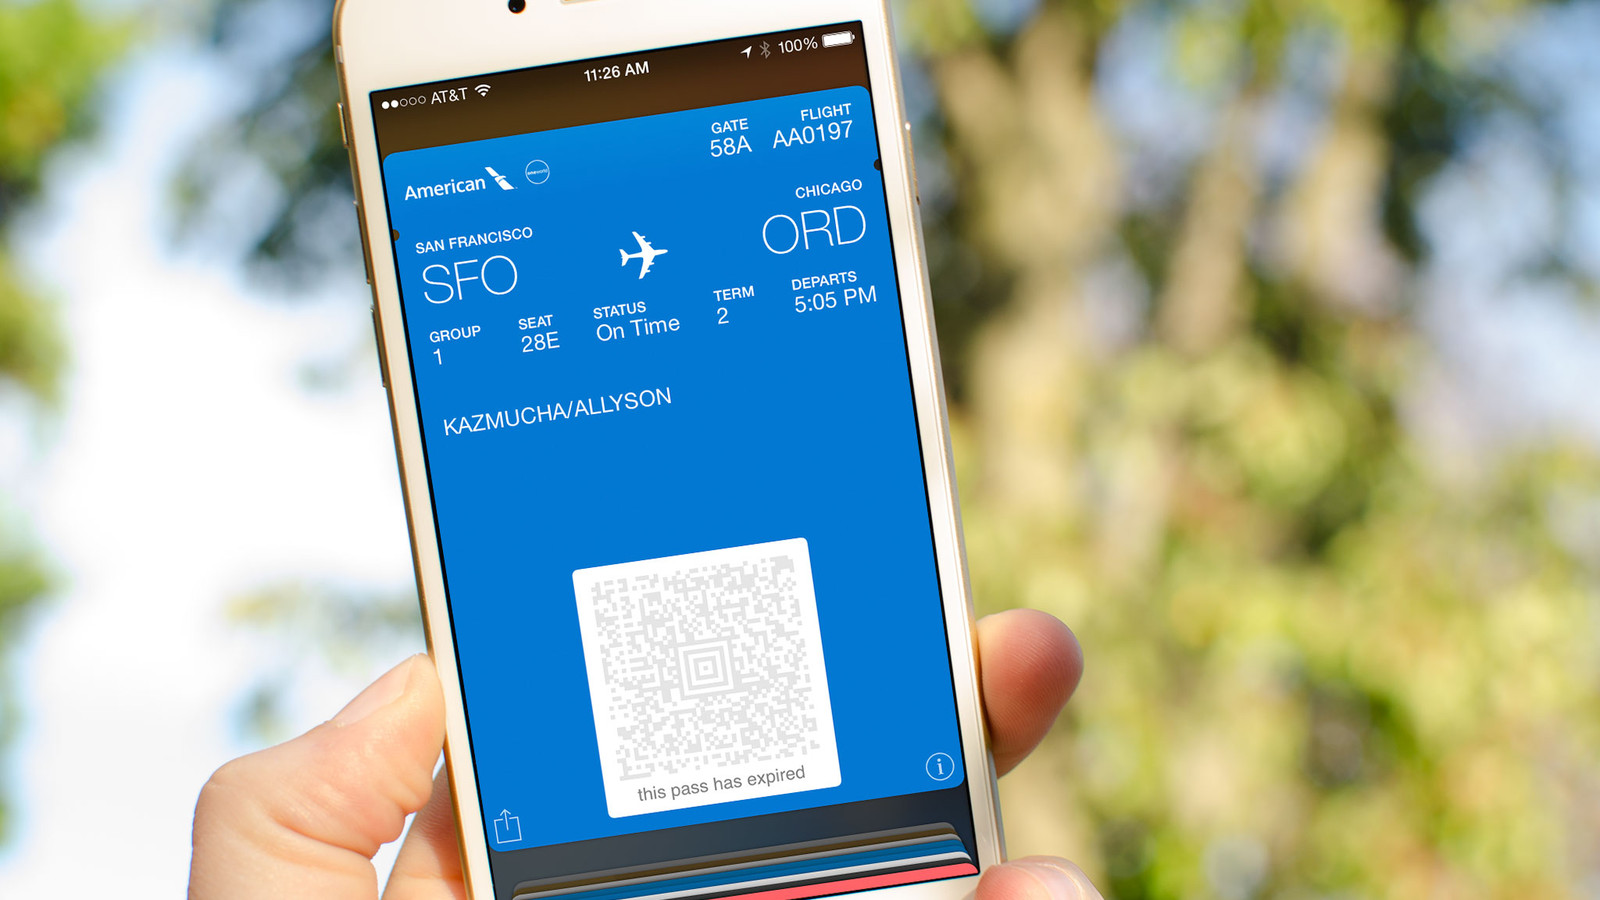 Streamlining the traveler journey with mobile apps